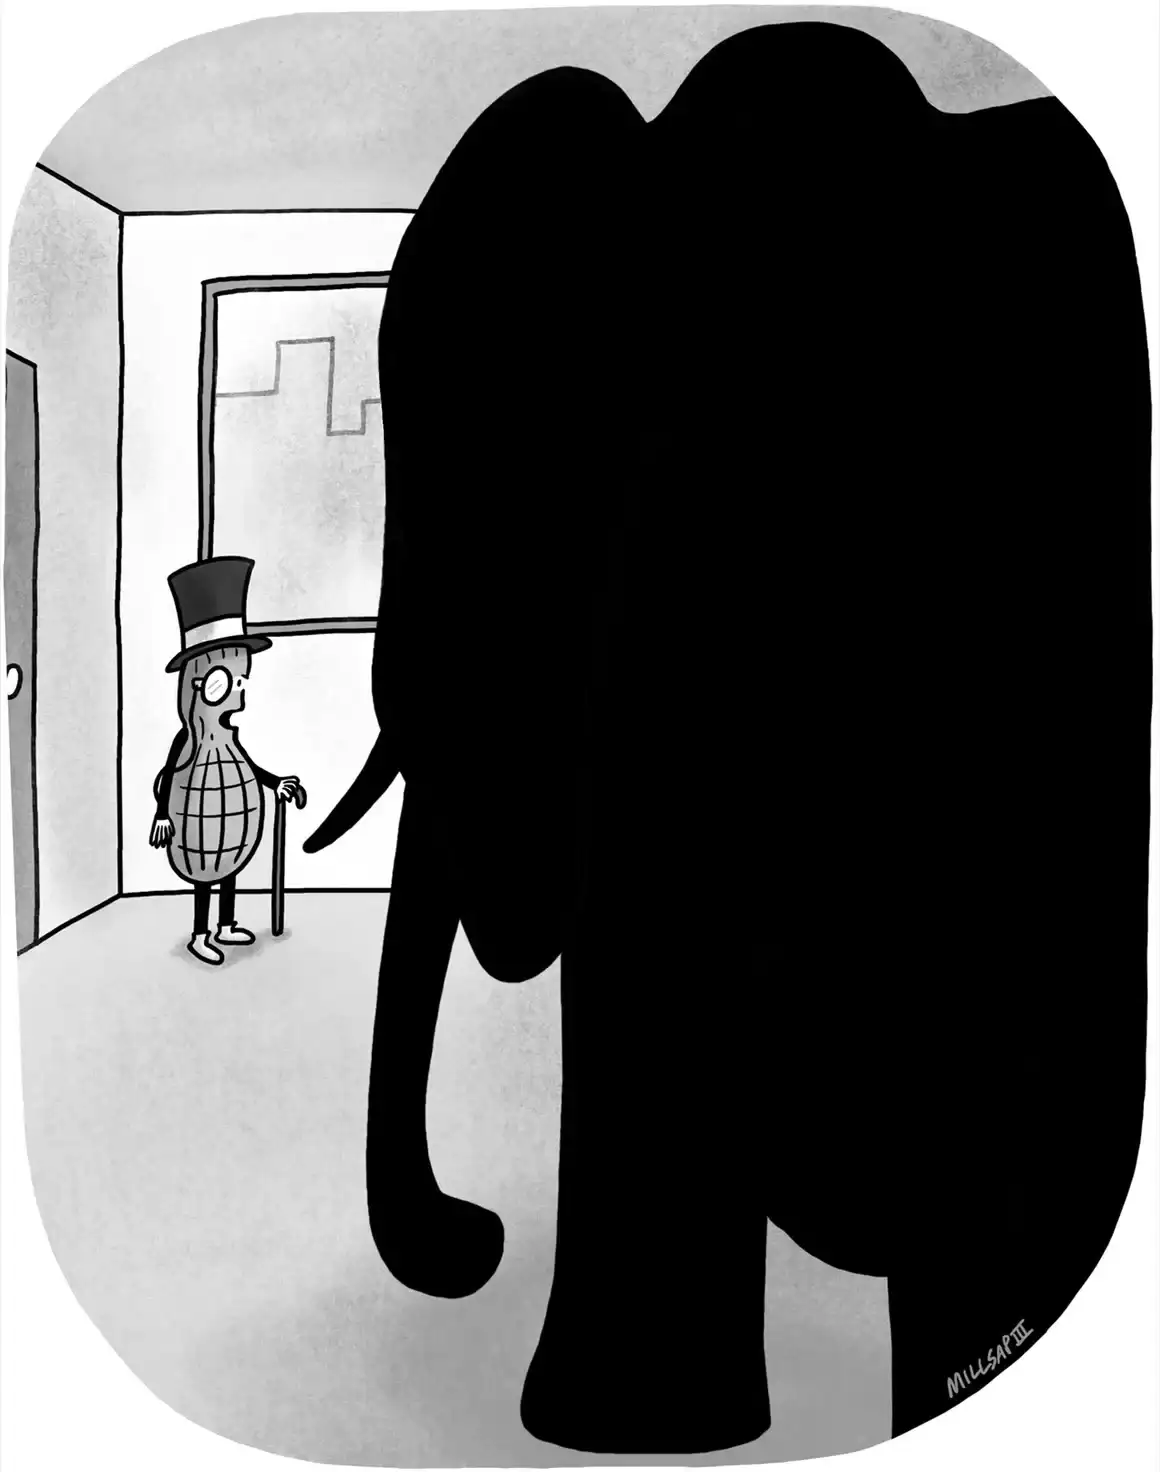 Mr. Peanut stands in the shadow of a large elephant.